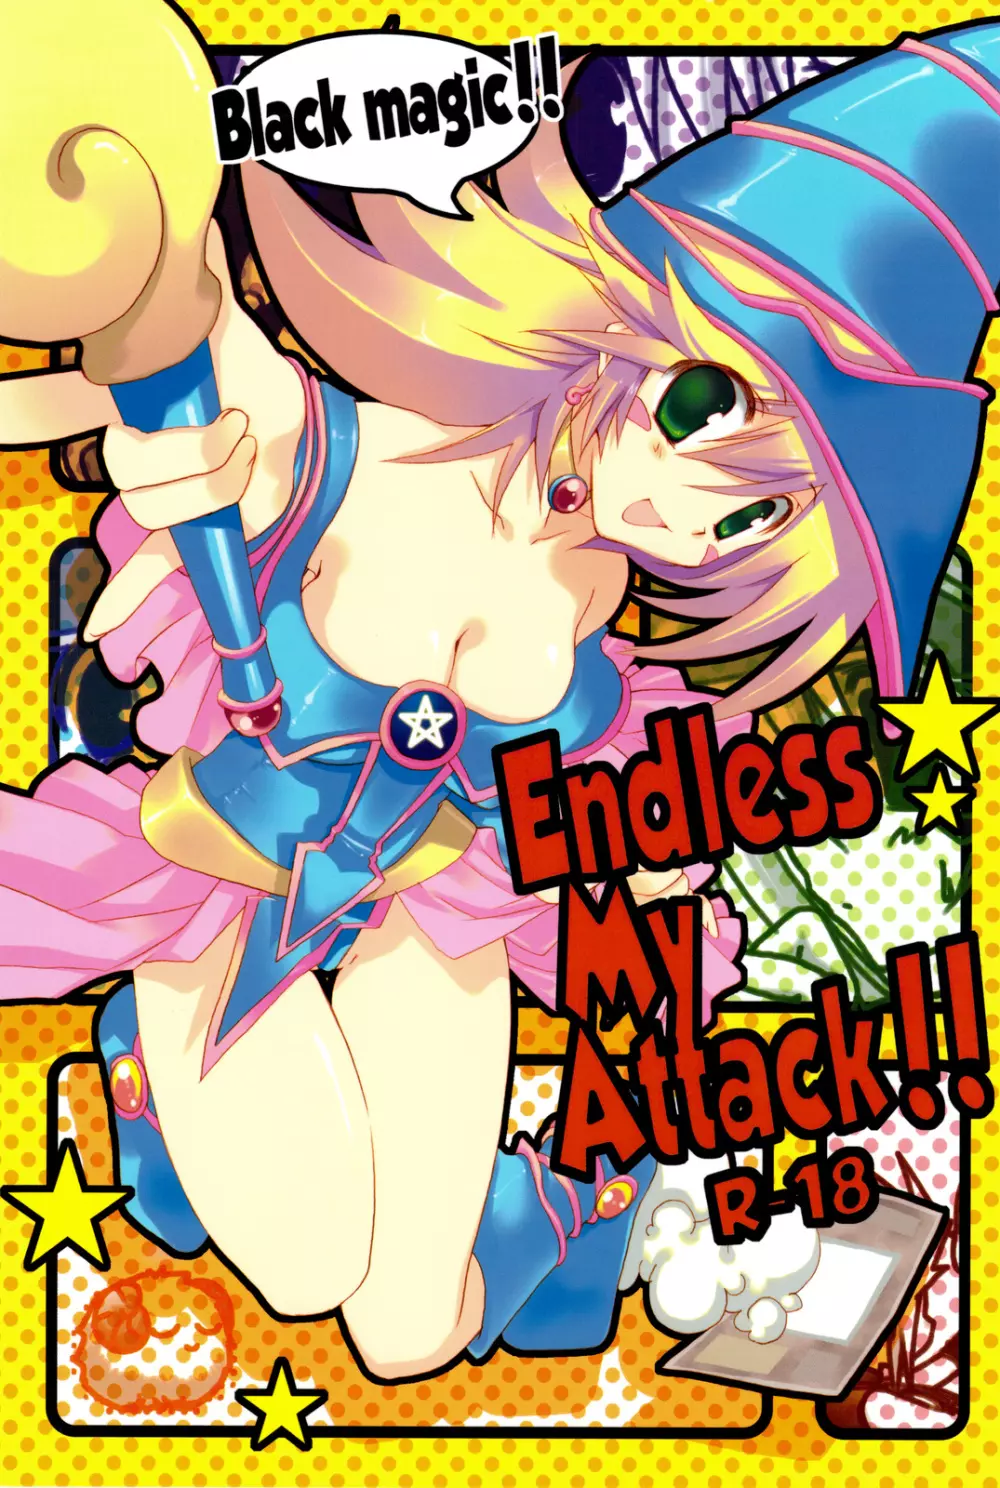 Endless My Attack!! Page.1